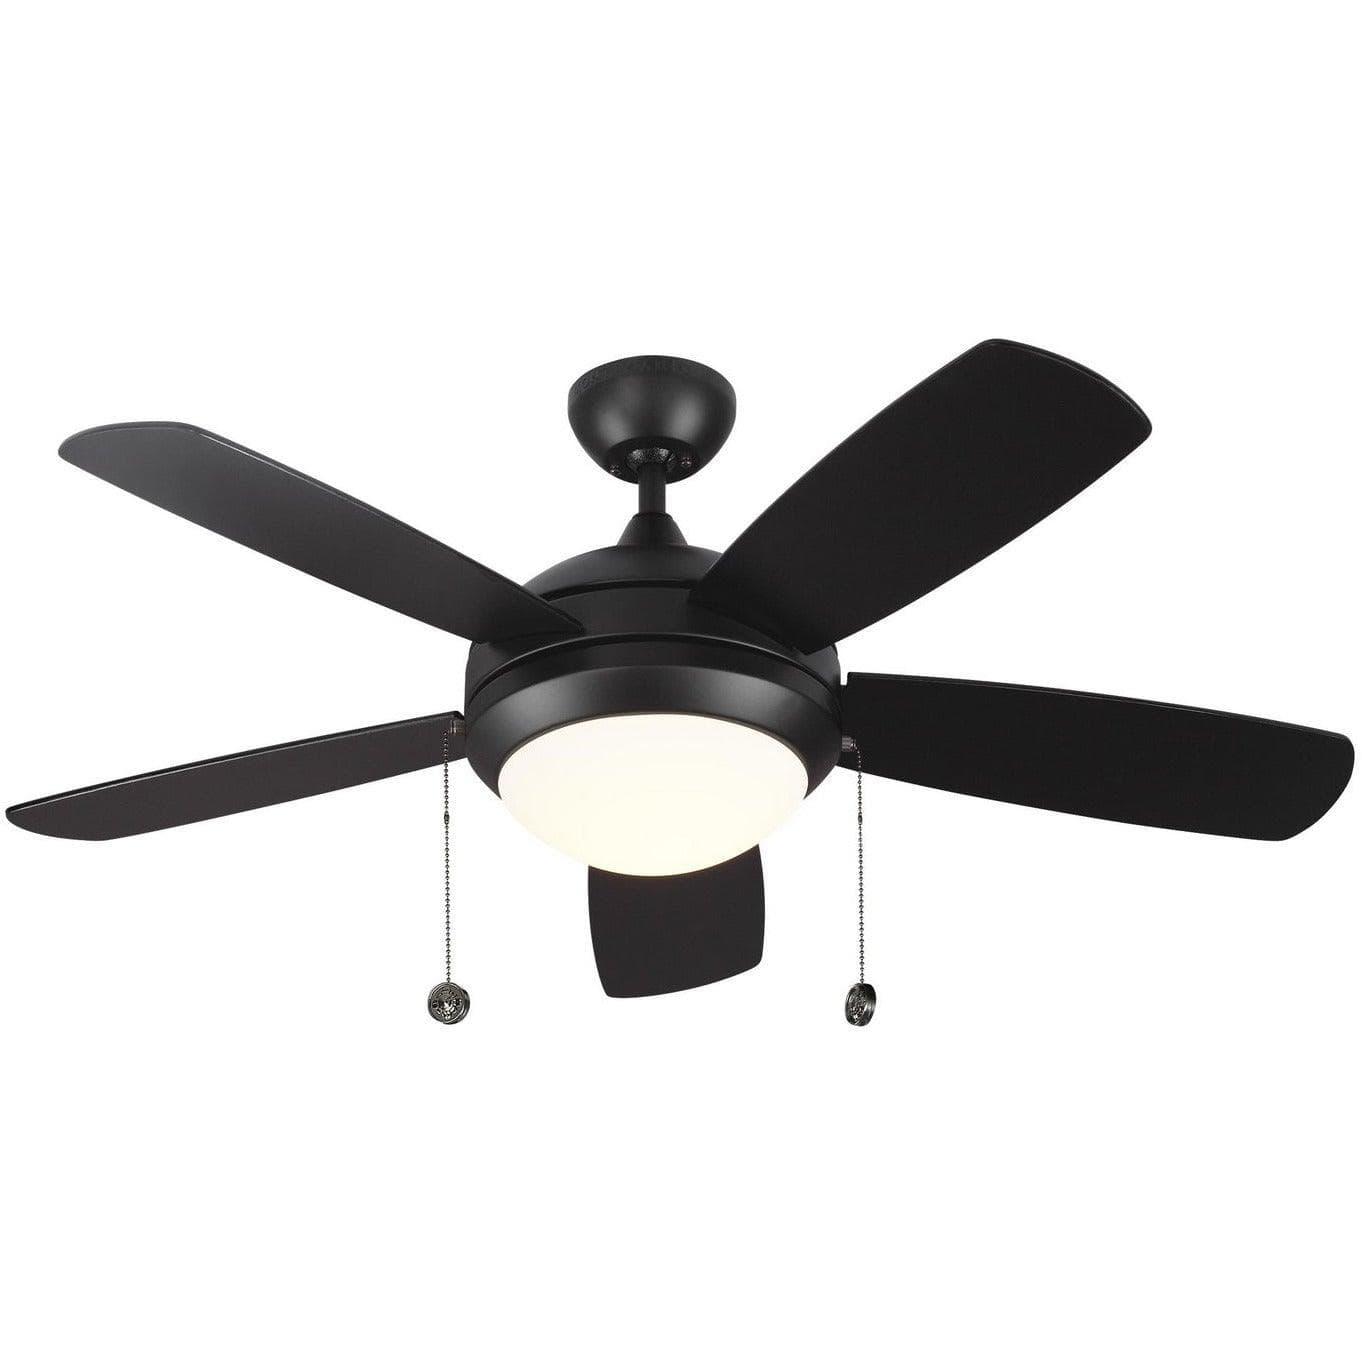 Visual Comfort Fan Collection - Discus Classic II 44" Ceiling Fan - 5DIC44BKD-V1 | Montreal Lighting & Hardware